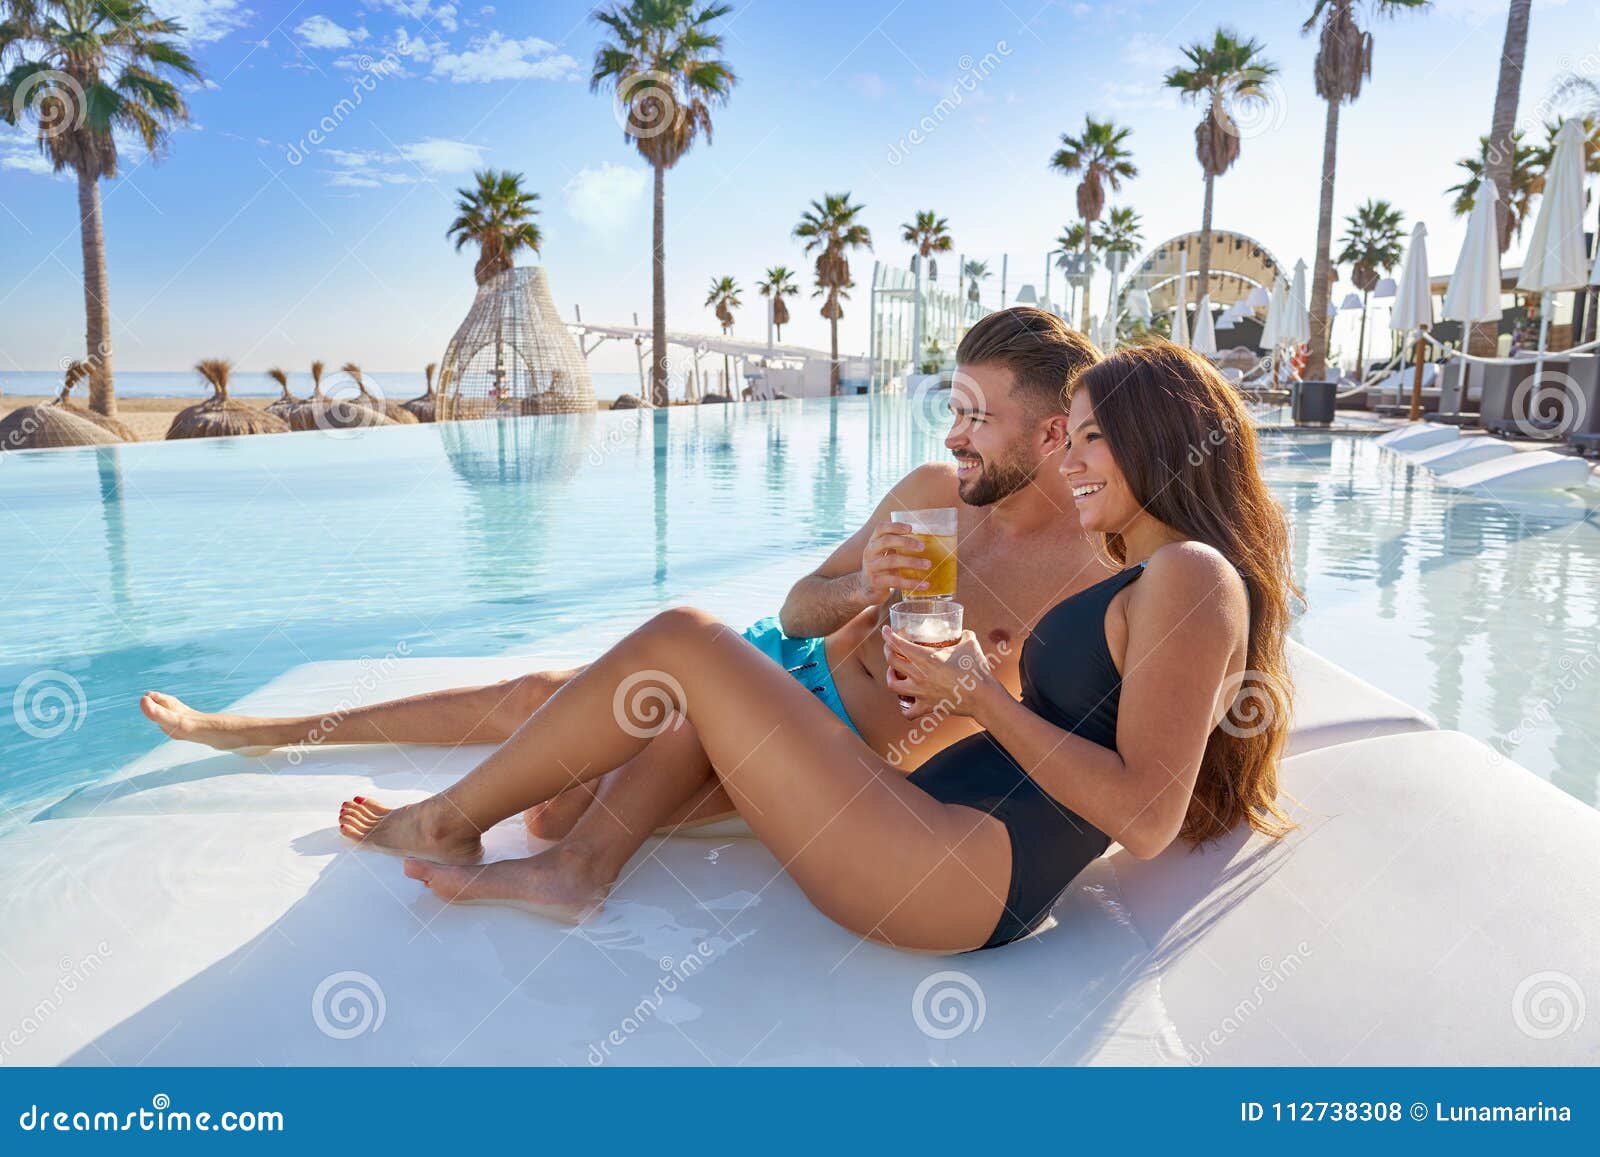 young couple on pool hammock at beach resort